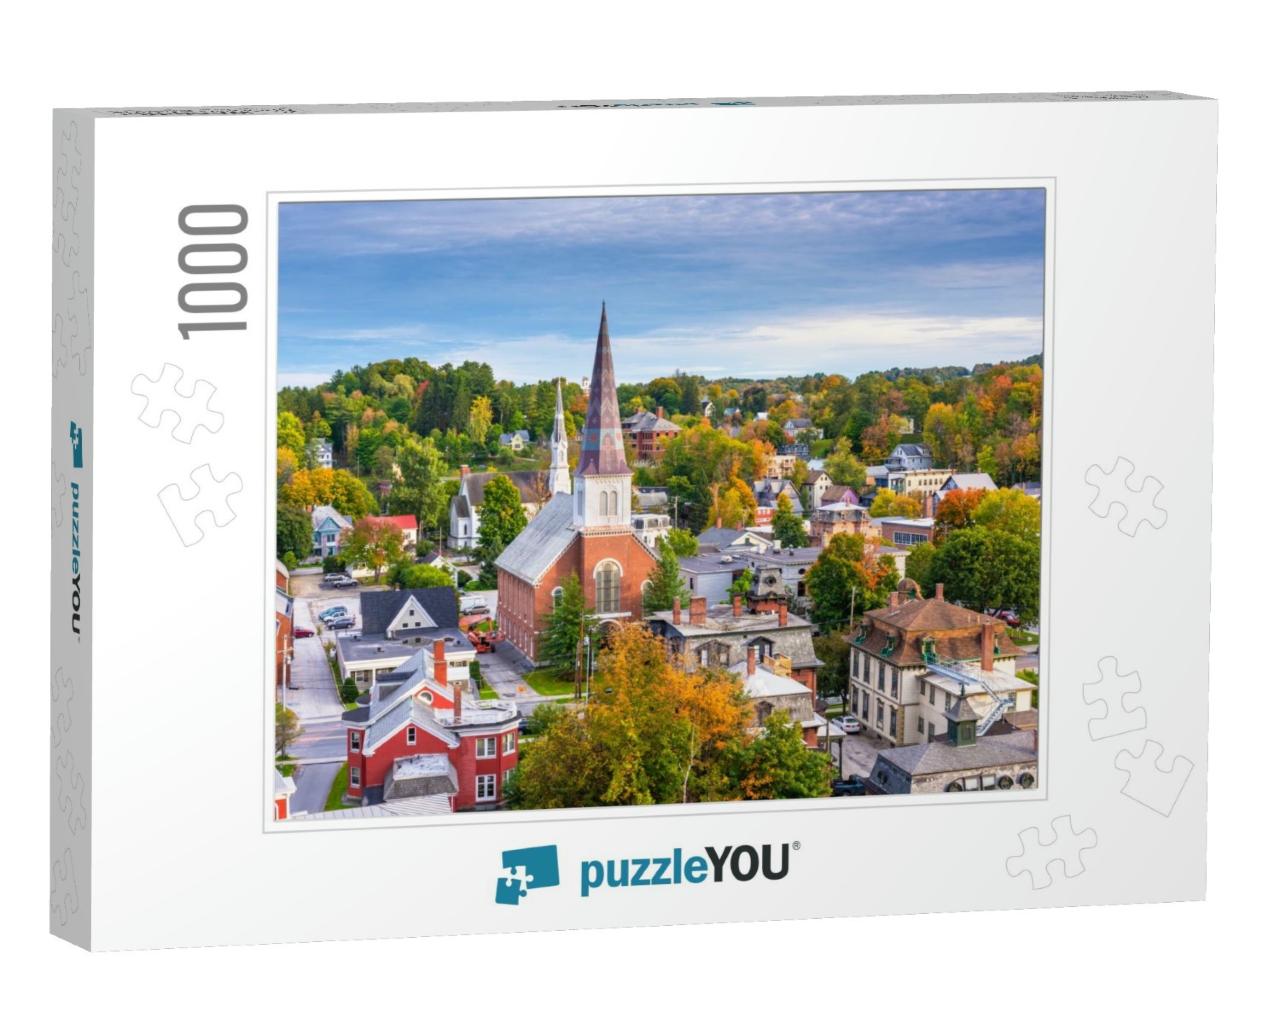 Montpelier, Vermont, USA Autumn Town Skyline... Jigsaw Puzzle with 1000 pieces